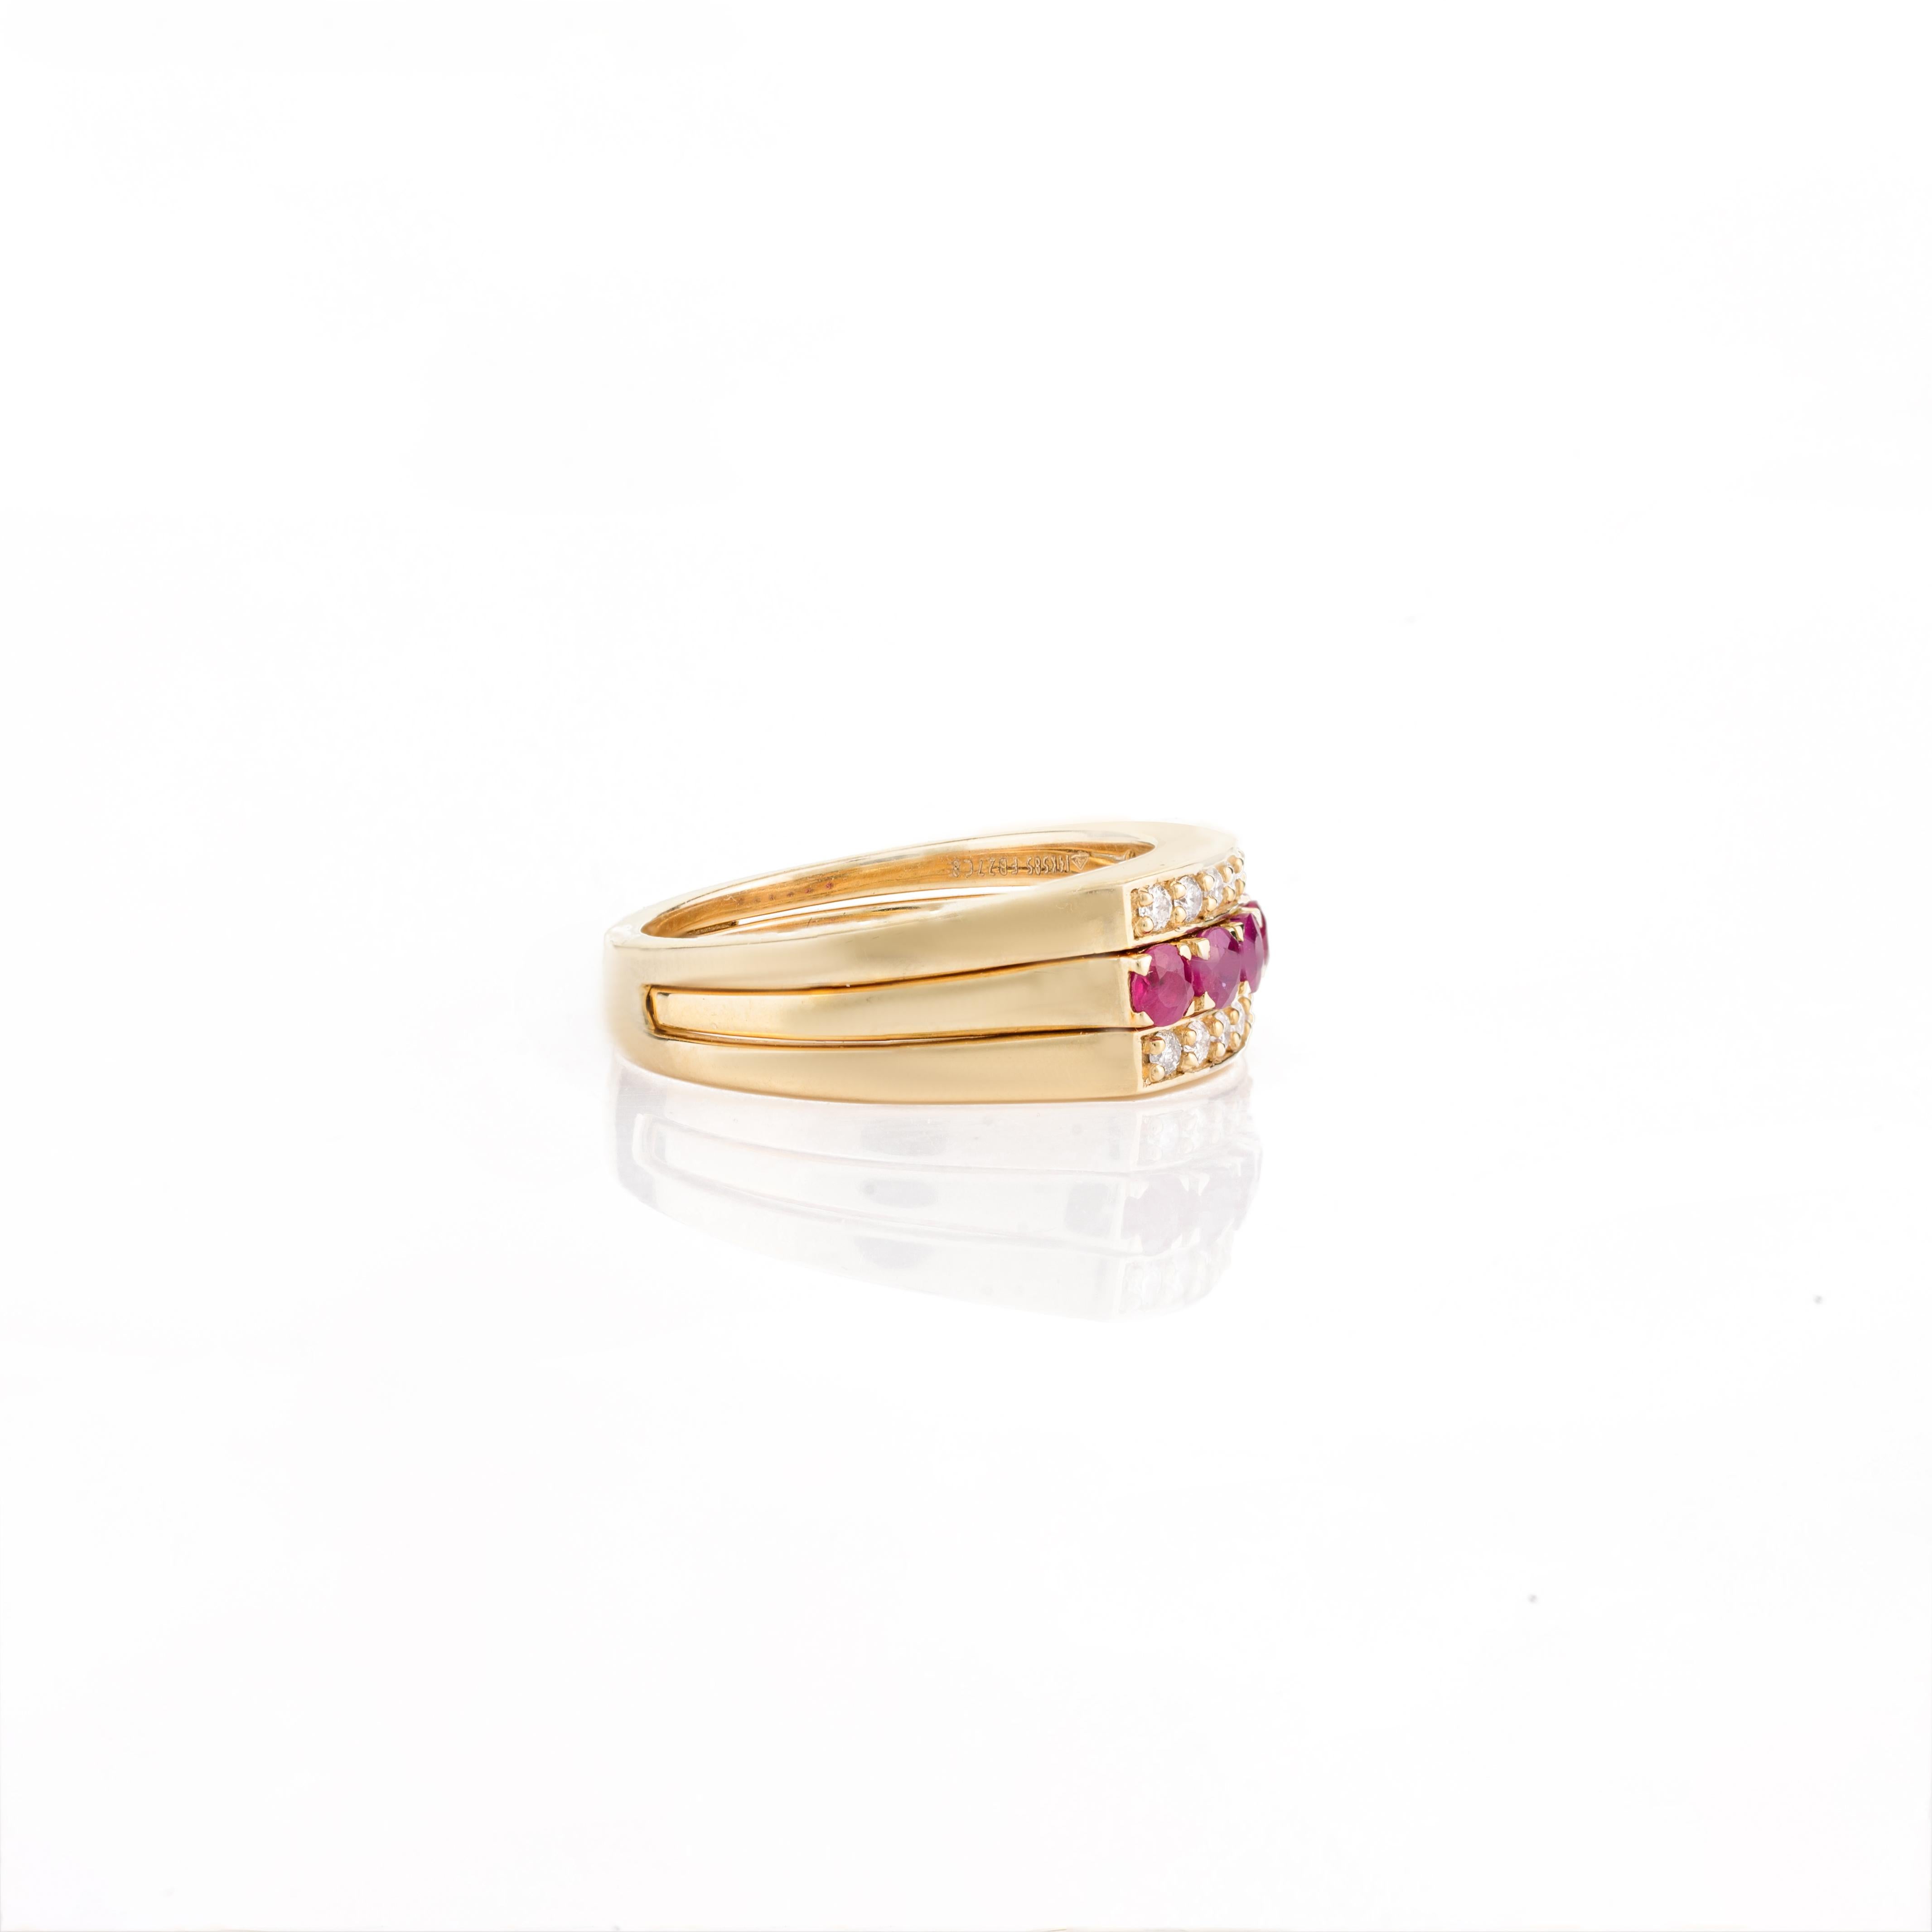 For Sale:  Unisex Two-in-One 14k Solid Yellow Gold Natural Ruby and Diamond Wedding Ring 9